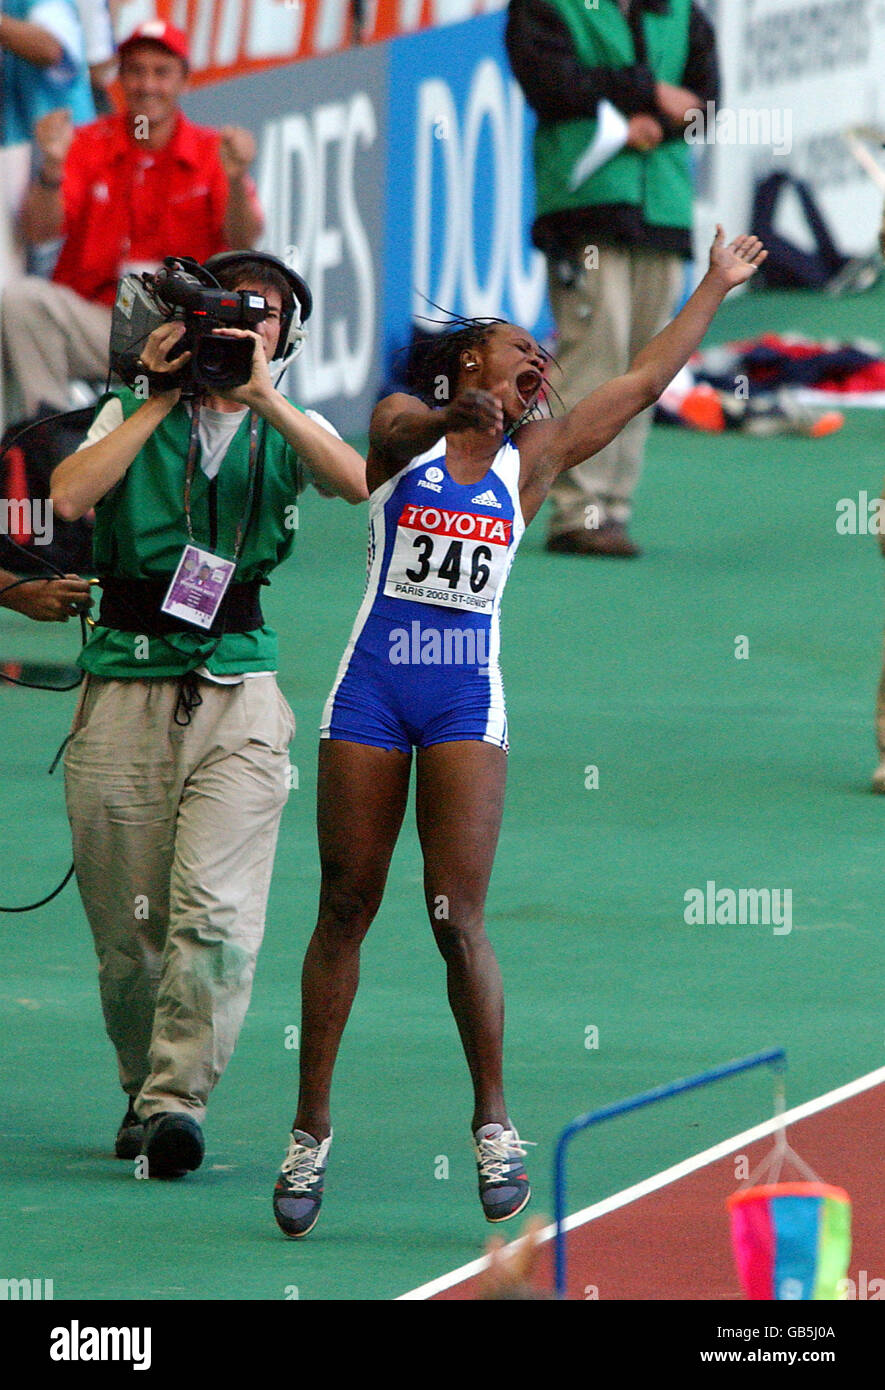 France's Eunice Barber celebrates as she finds out that her last jump wins the competition Stock Photo